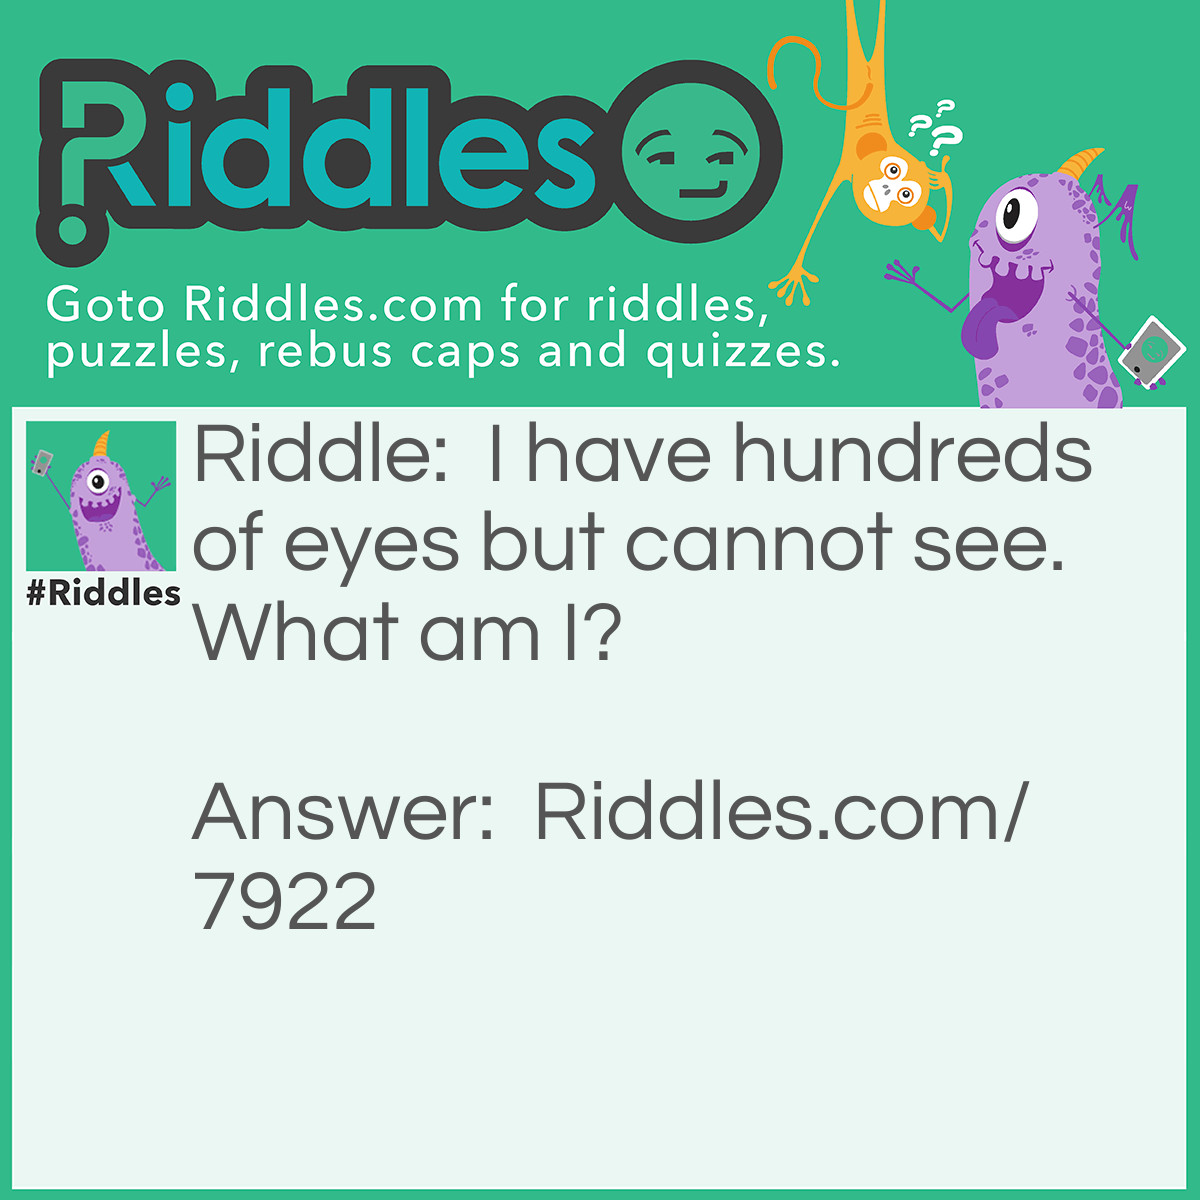 Riddle: I have hundreds of eyes but cannot see. What am I? Answer: A potato.